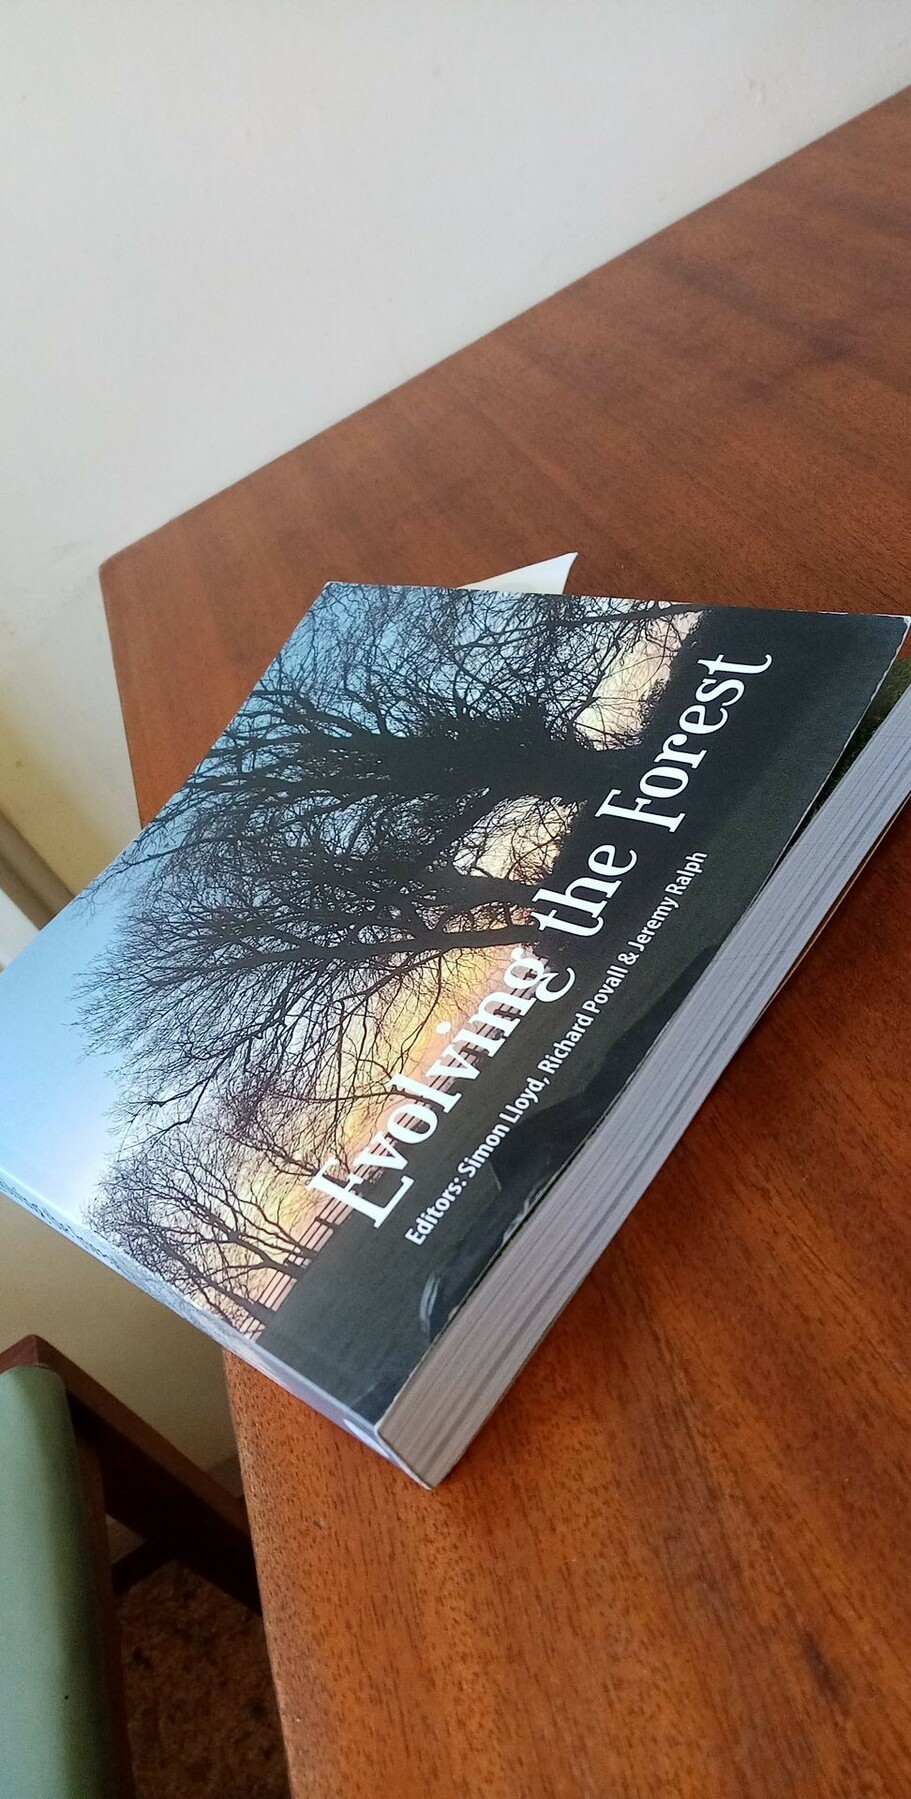 A photograph of a closed book on a wooden table. The cover has a silhouetted photograph of a row of trees. It is called 'Evolving the Forest'.